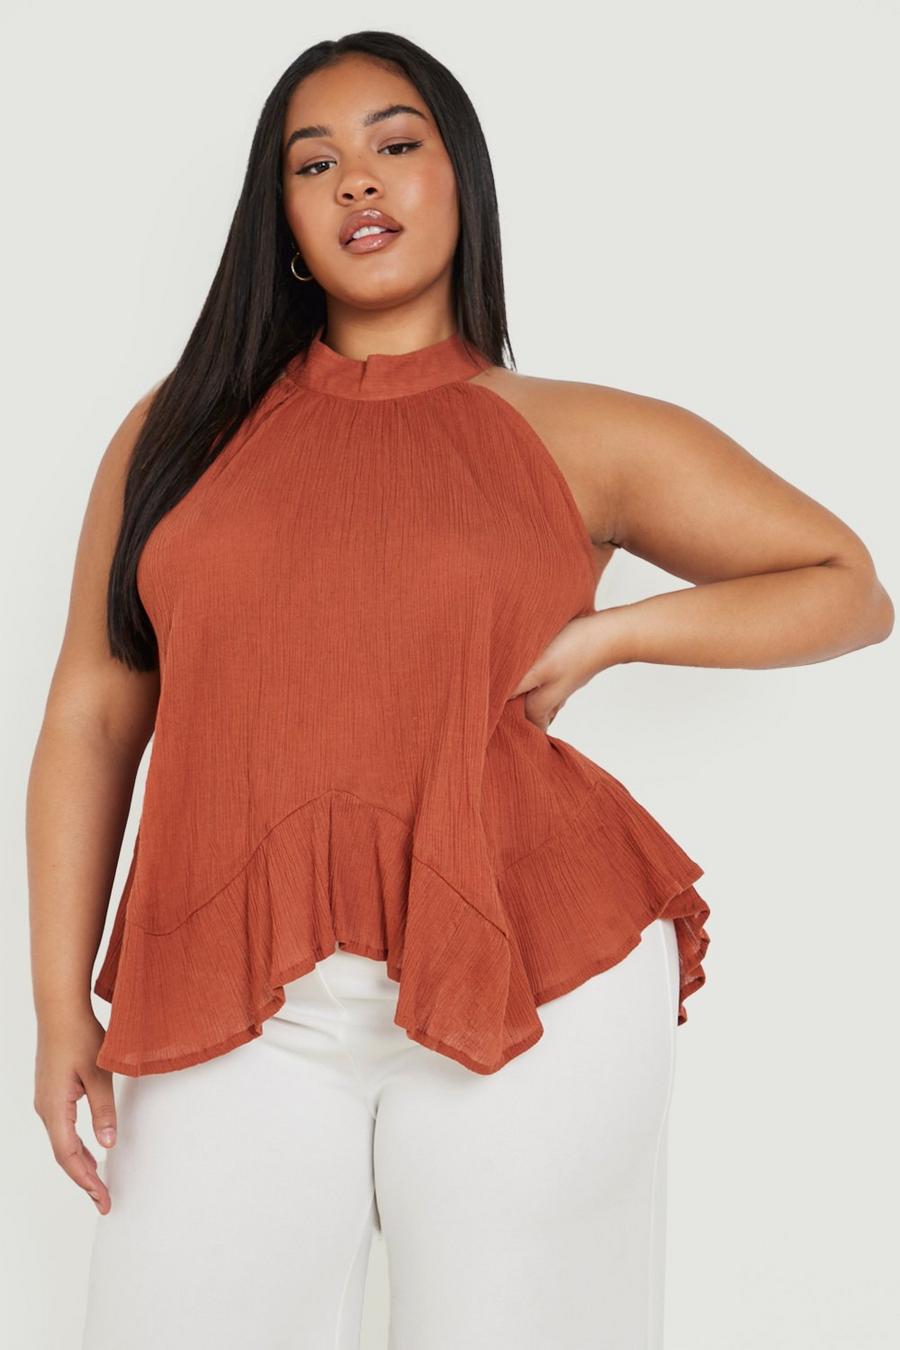 Tan brown Plus Cheesecloth Halter Neck Frill Swing Top